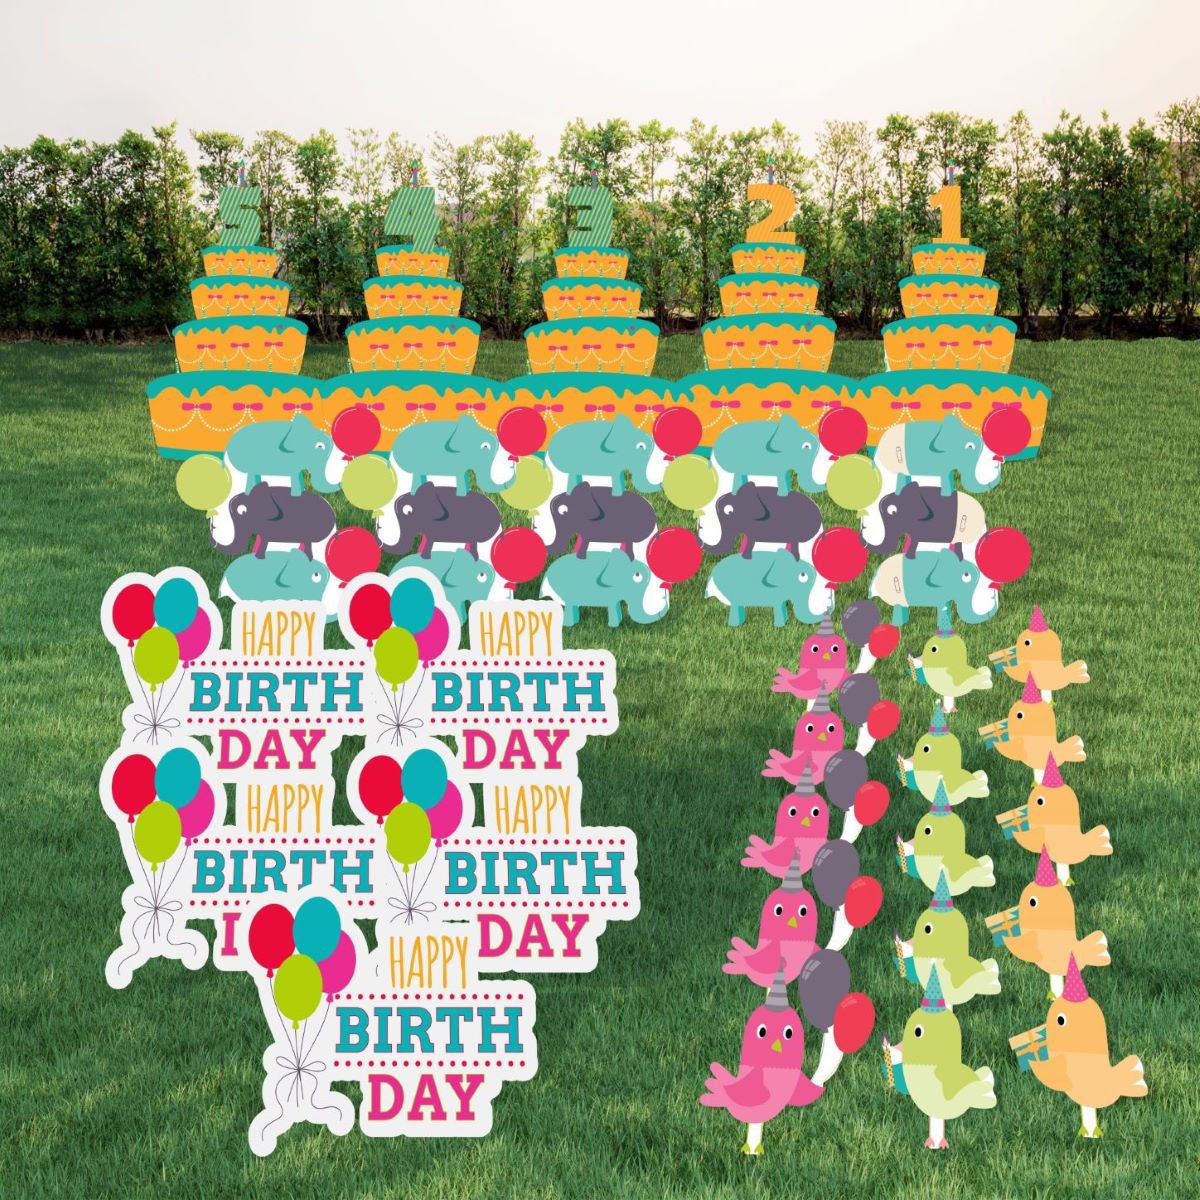 Youth Birthday Yard Card Rental Business Package